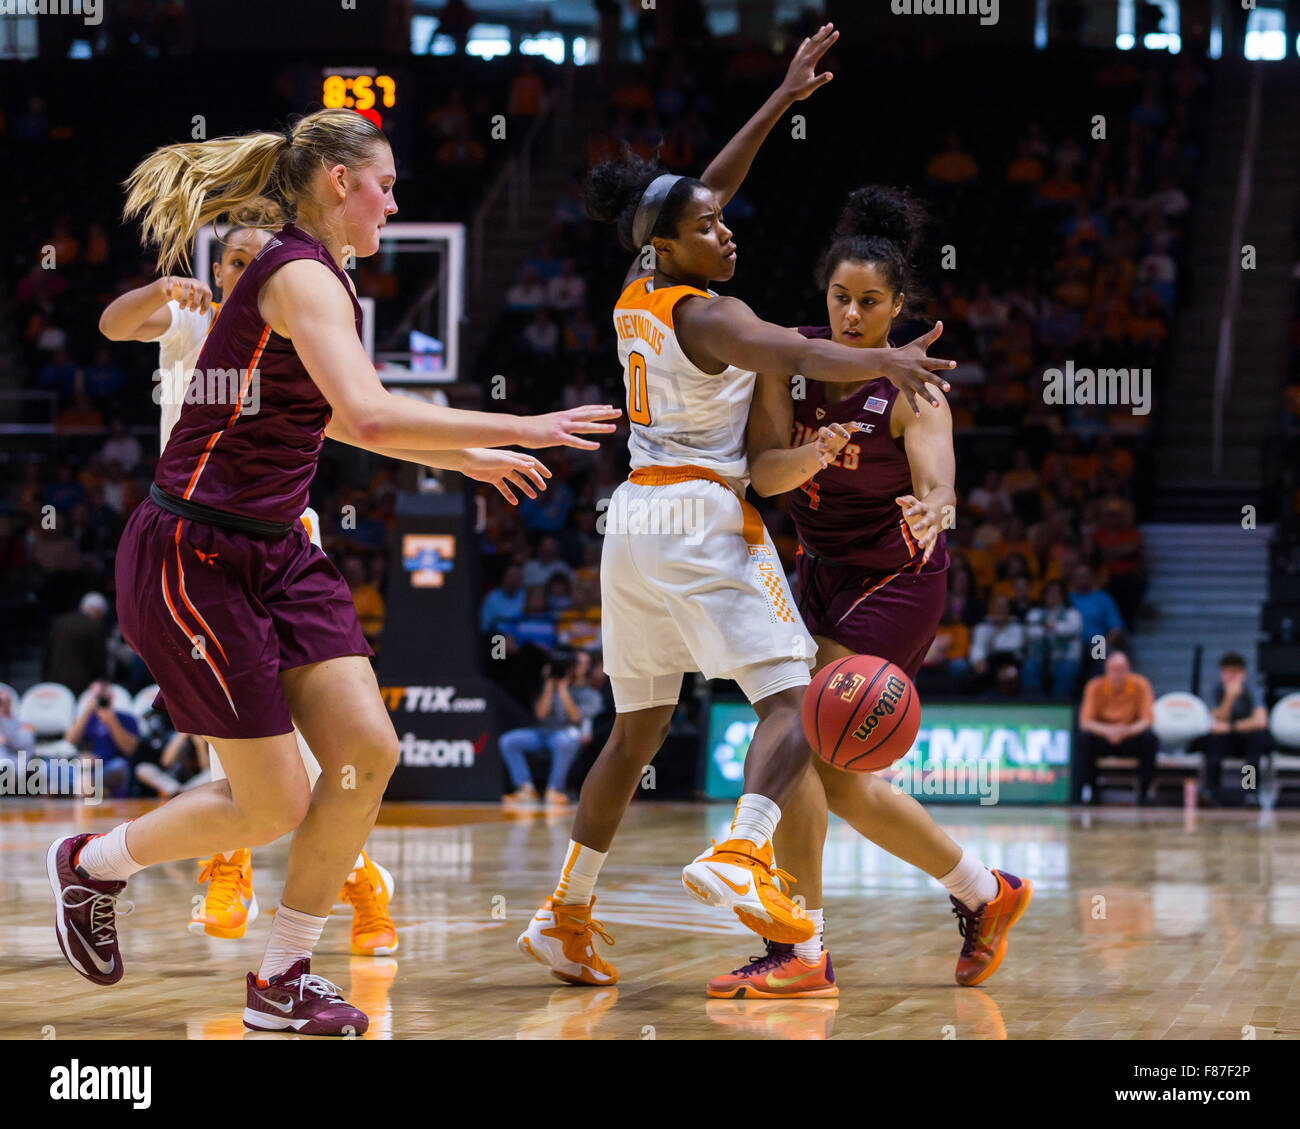 December 6, 2015: Hannah Young #4 passes the ball to Regan Magarity #11 of the Virginia Tech Hokies against the defense of Jordan Reynolds #0 of the Tennessee Lady Volunteers during the NCAA basketball game between the University of Tennessee Lady Volunteers and the Virginia Tech Hokies at Thompson Boling Arena in Knoxville TN Tim Gangloff/CSM Stock Photo